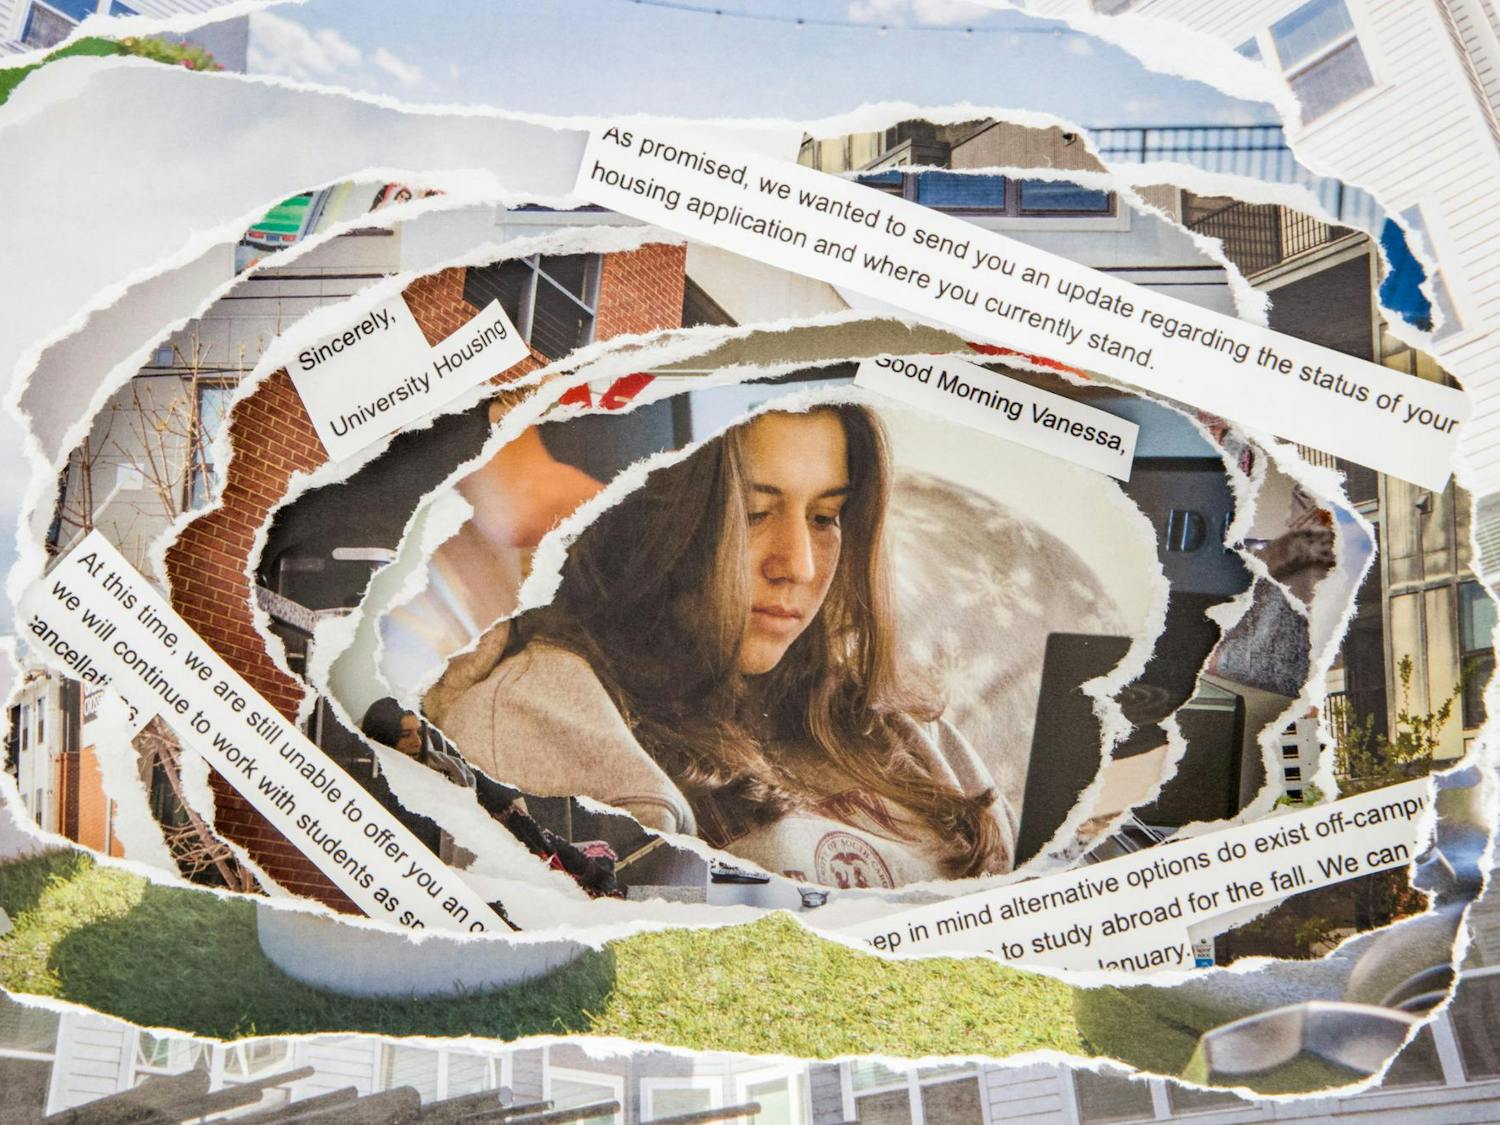 A compilation of photos from different student housing complexes across Columbia, South Carolina throughout the spring 2024 semester. At the center sits Vanessa Alaimo, a resident of 650 Lincoln, surrounded by clips of emails sent to her by the University of South Carolina housing office.